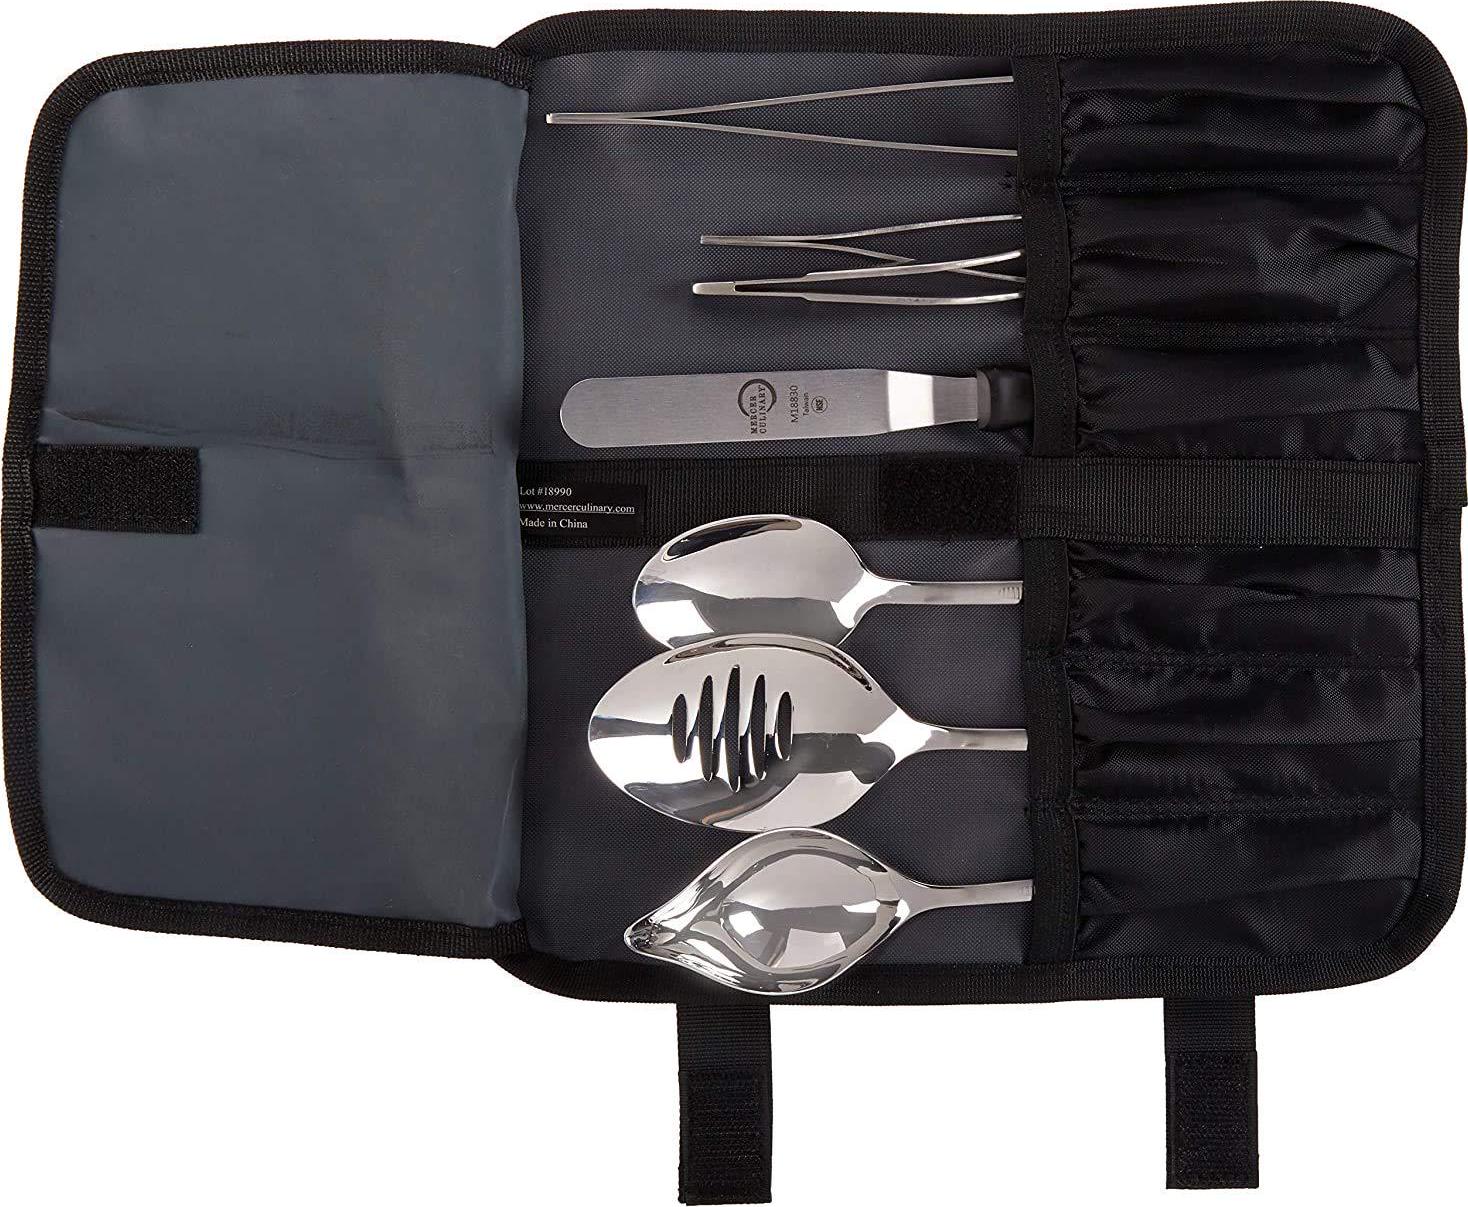 Mercer Culinary, Mercer Culinary M35149 Professional Chef Plating Kit, 8 Piece, Stainless Steel, Black